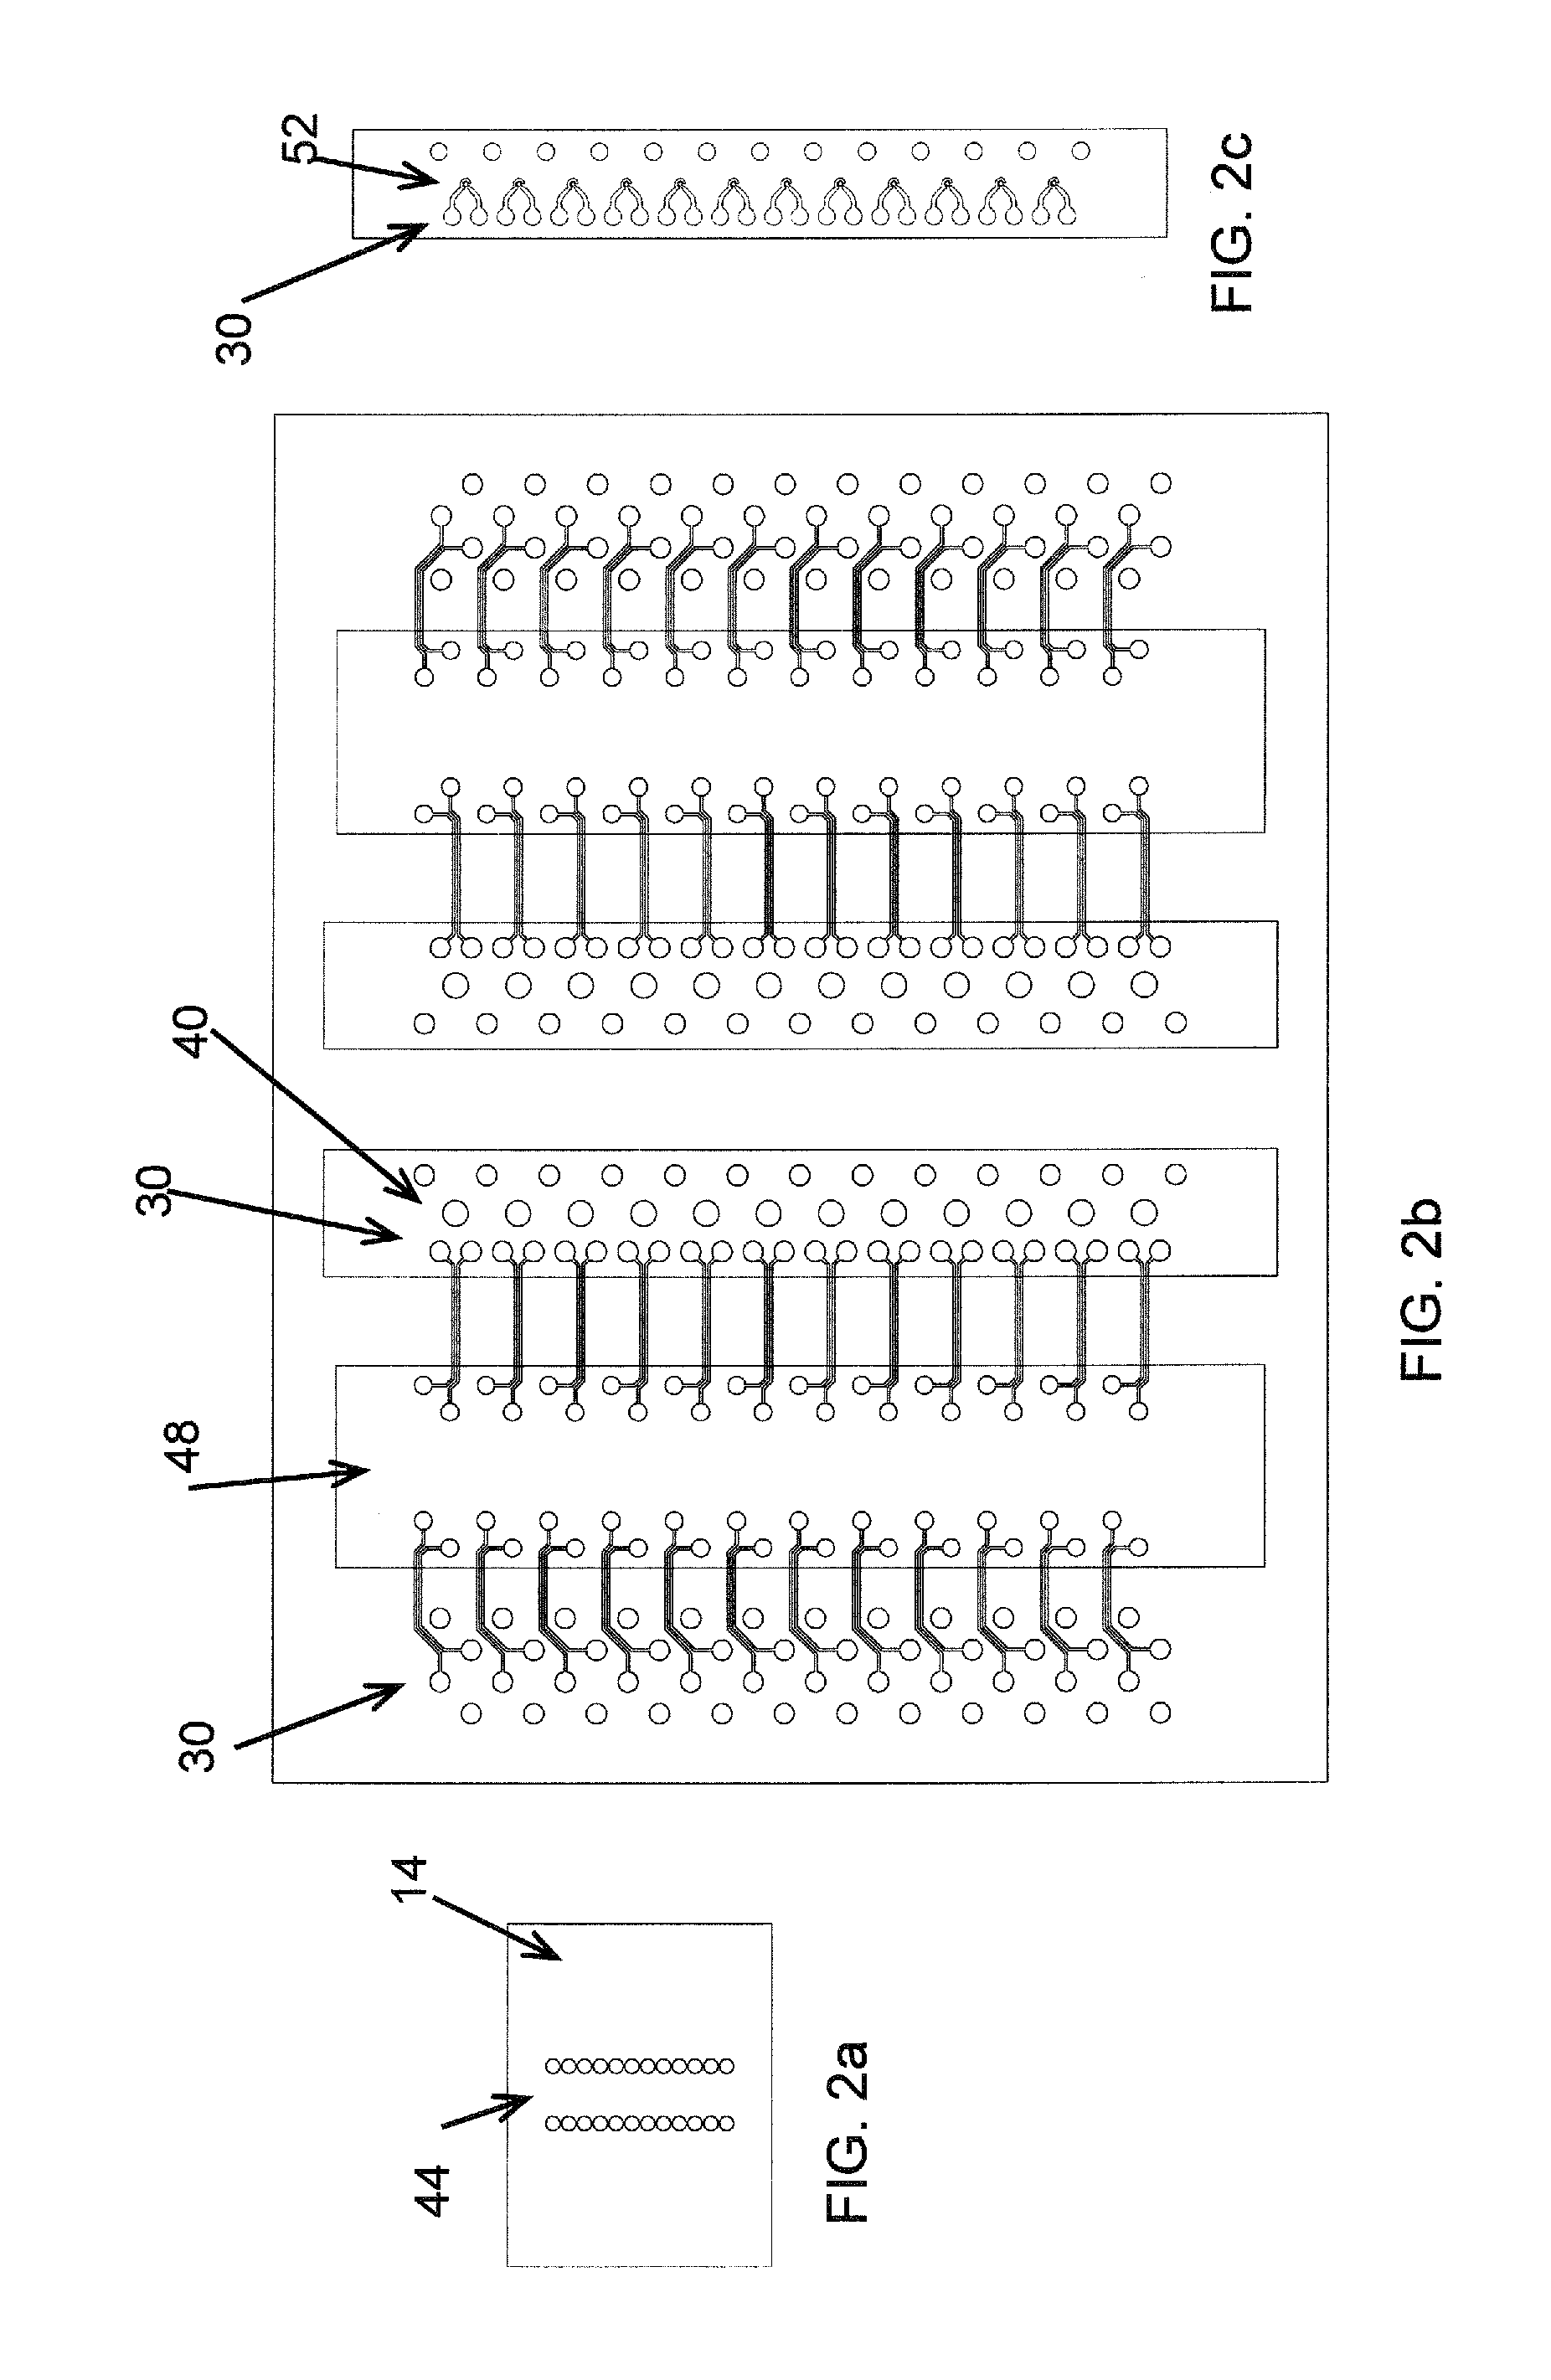 Silicon carrier optoelectronic packaging